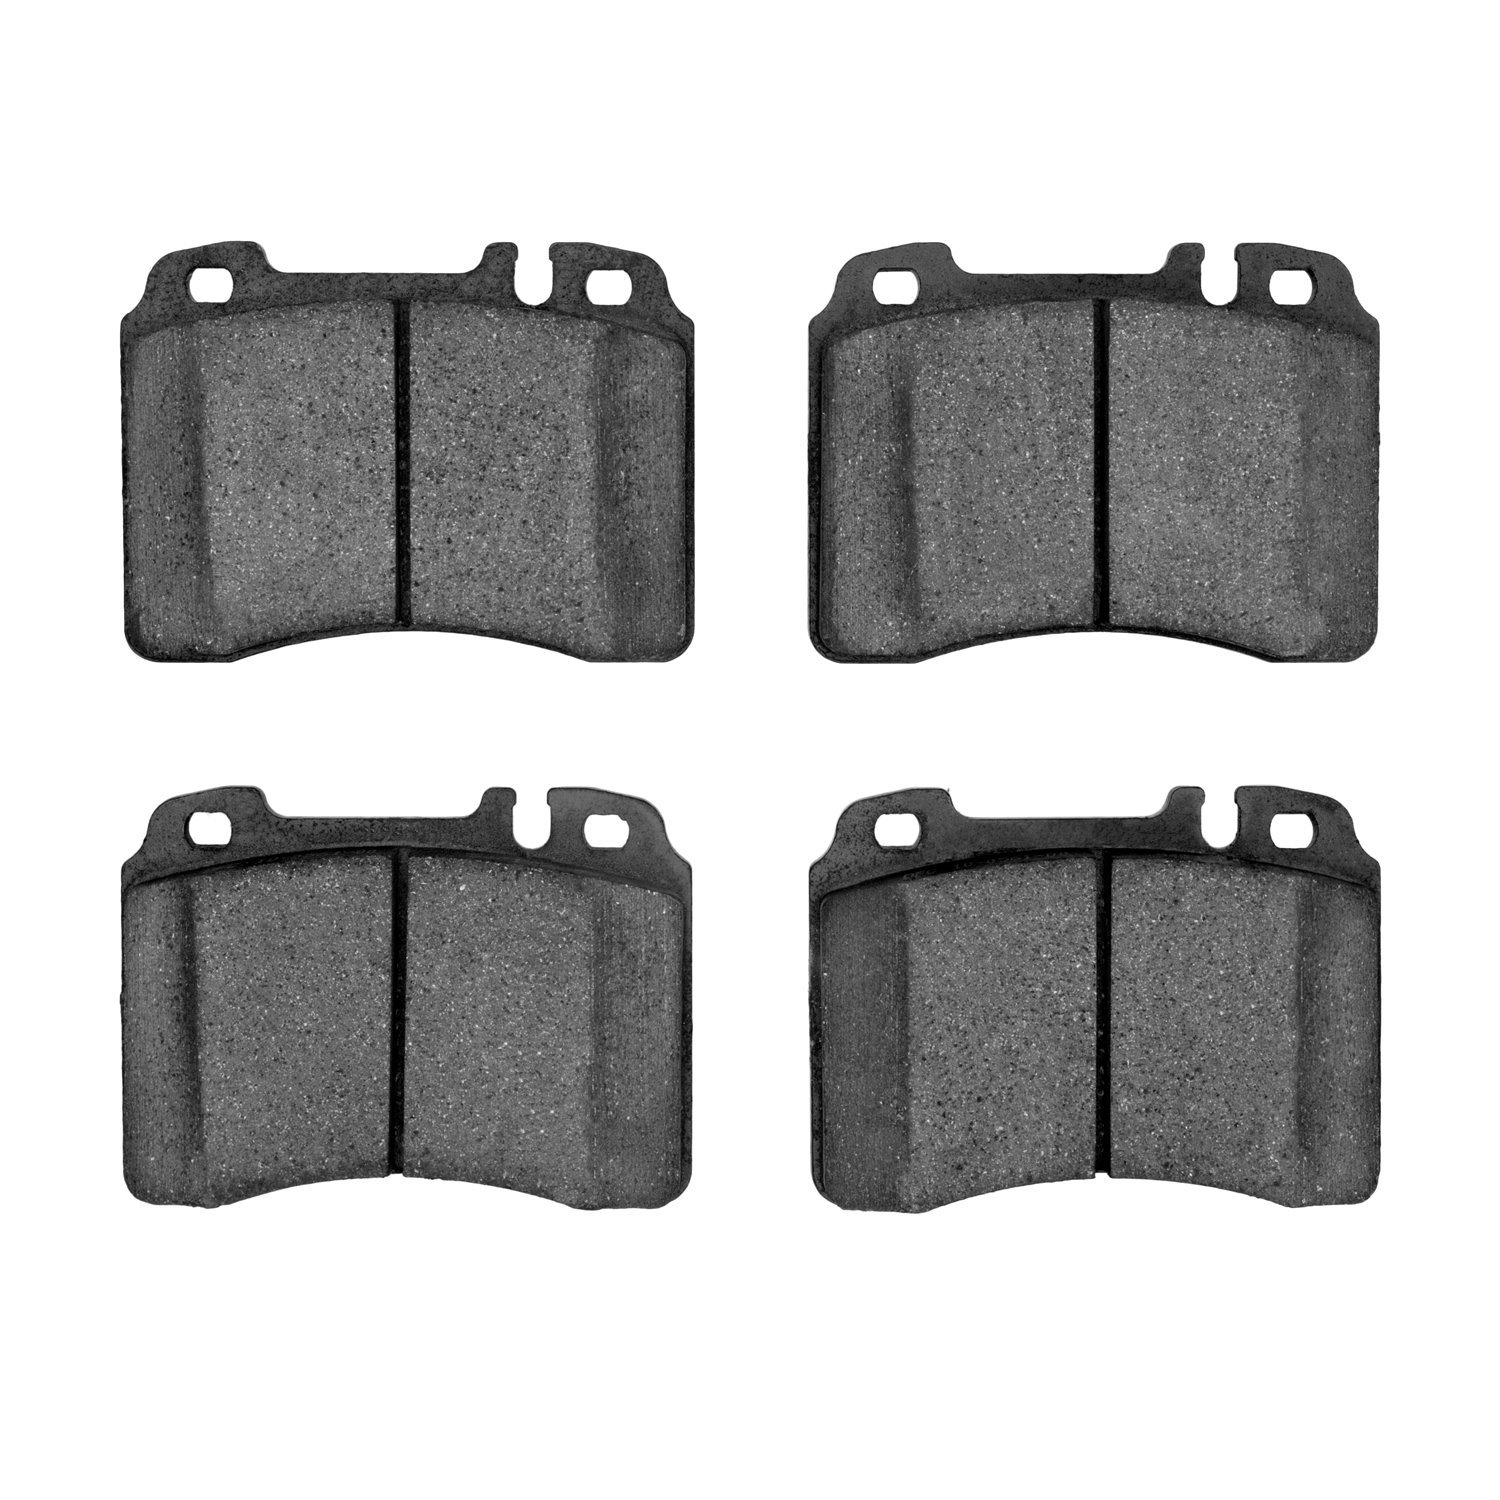 1551-0561-00 5000 Advanced Low-Metallic Brake Pads, 1990-2002 Multiple Makes/Models, Position: Front